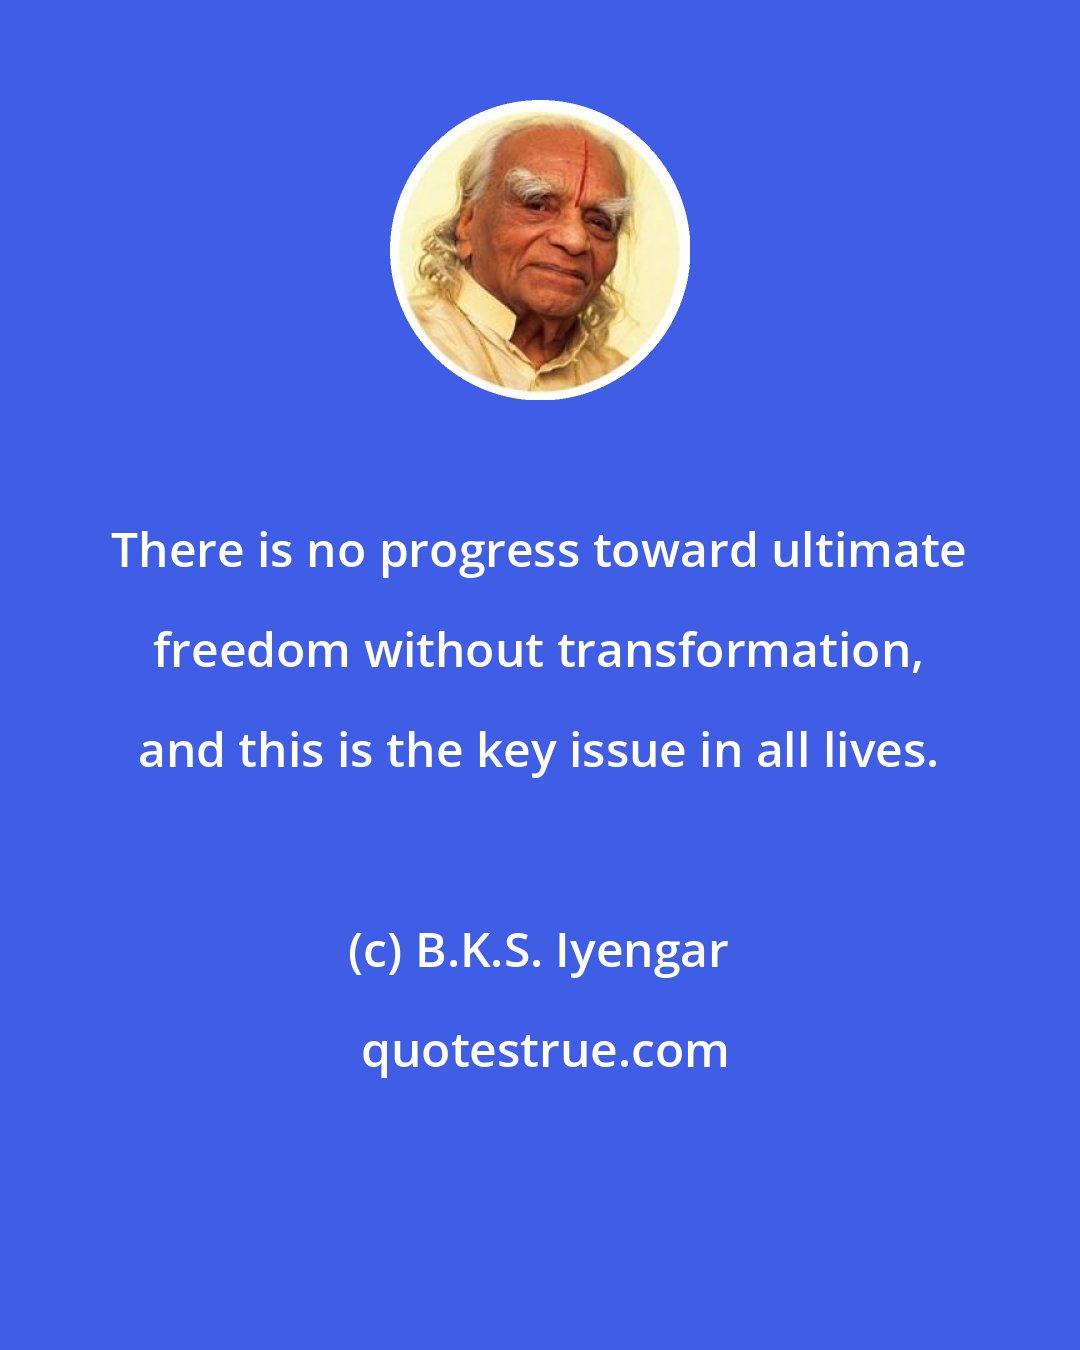 B.K.S. Iyengar: There is no progress toward ultimate freedom without transformation, and this is the key issue in all lives.